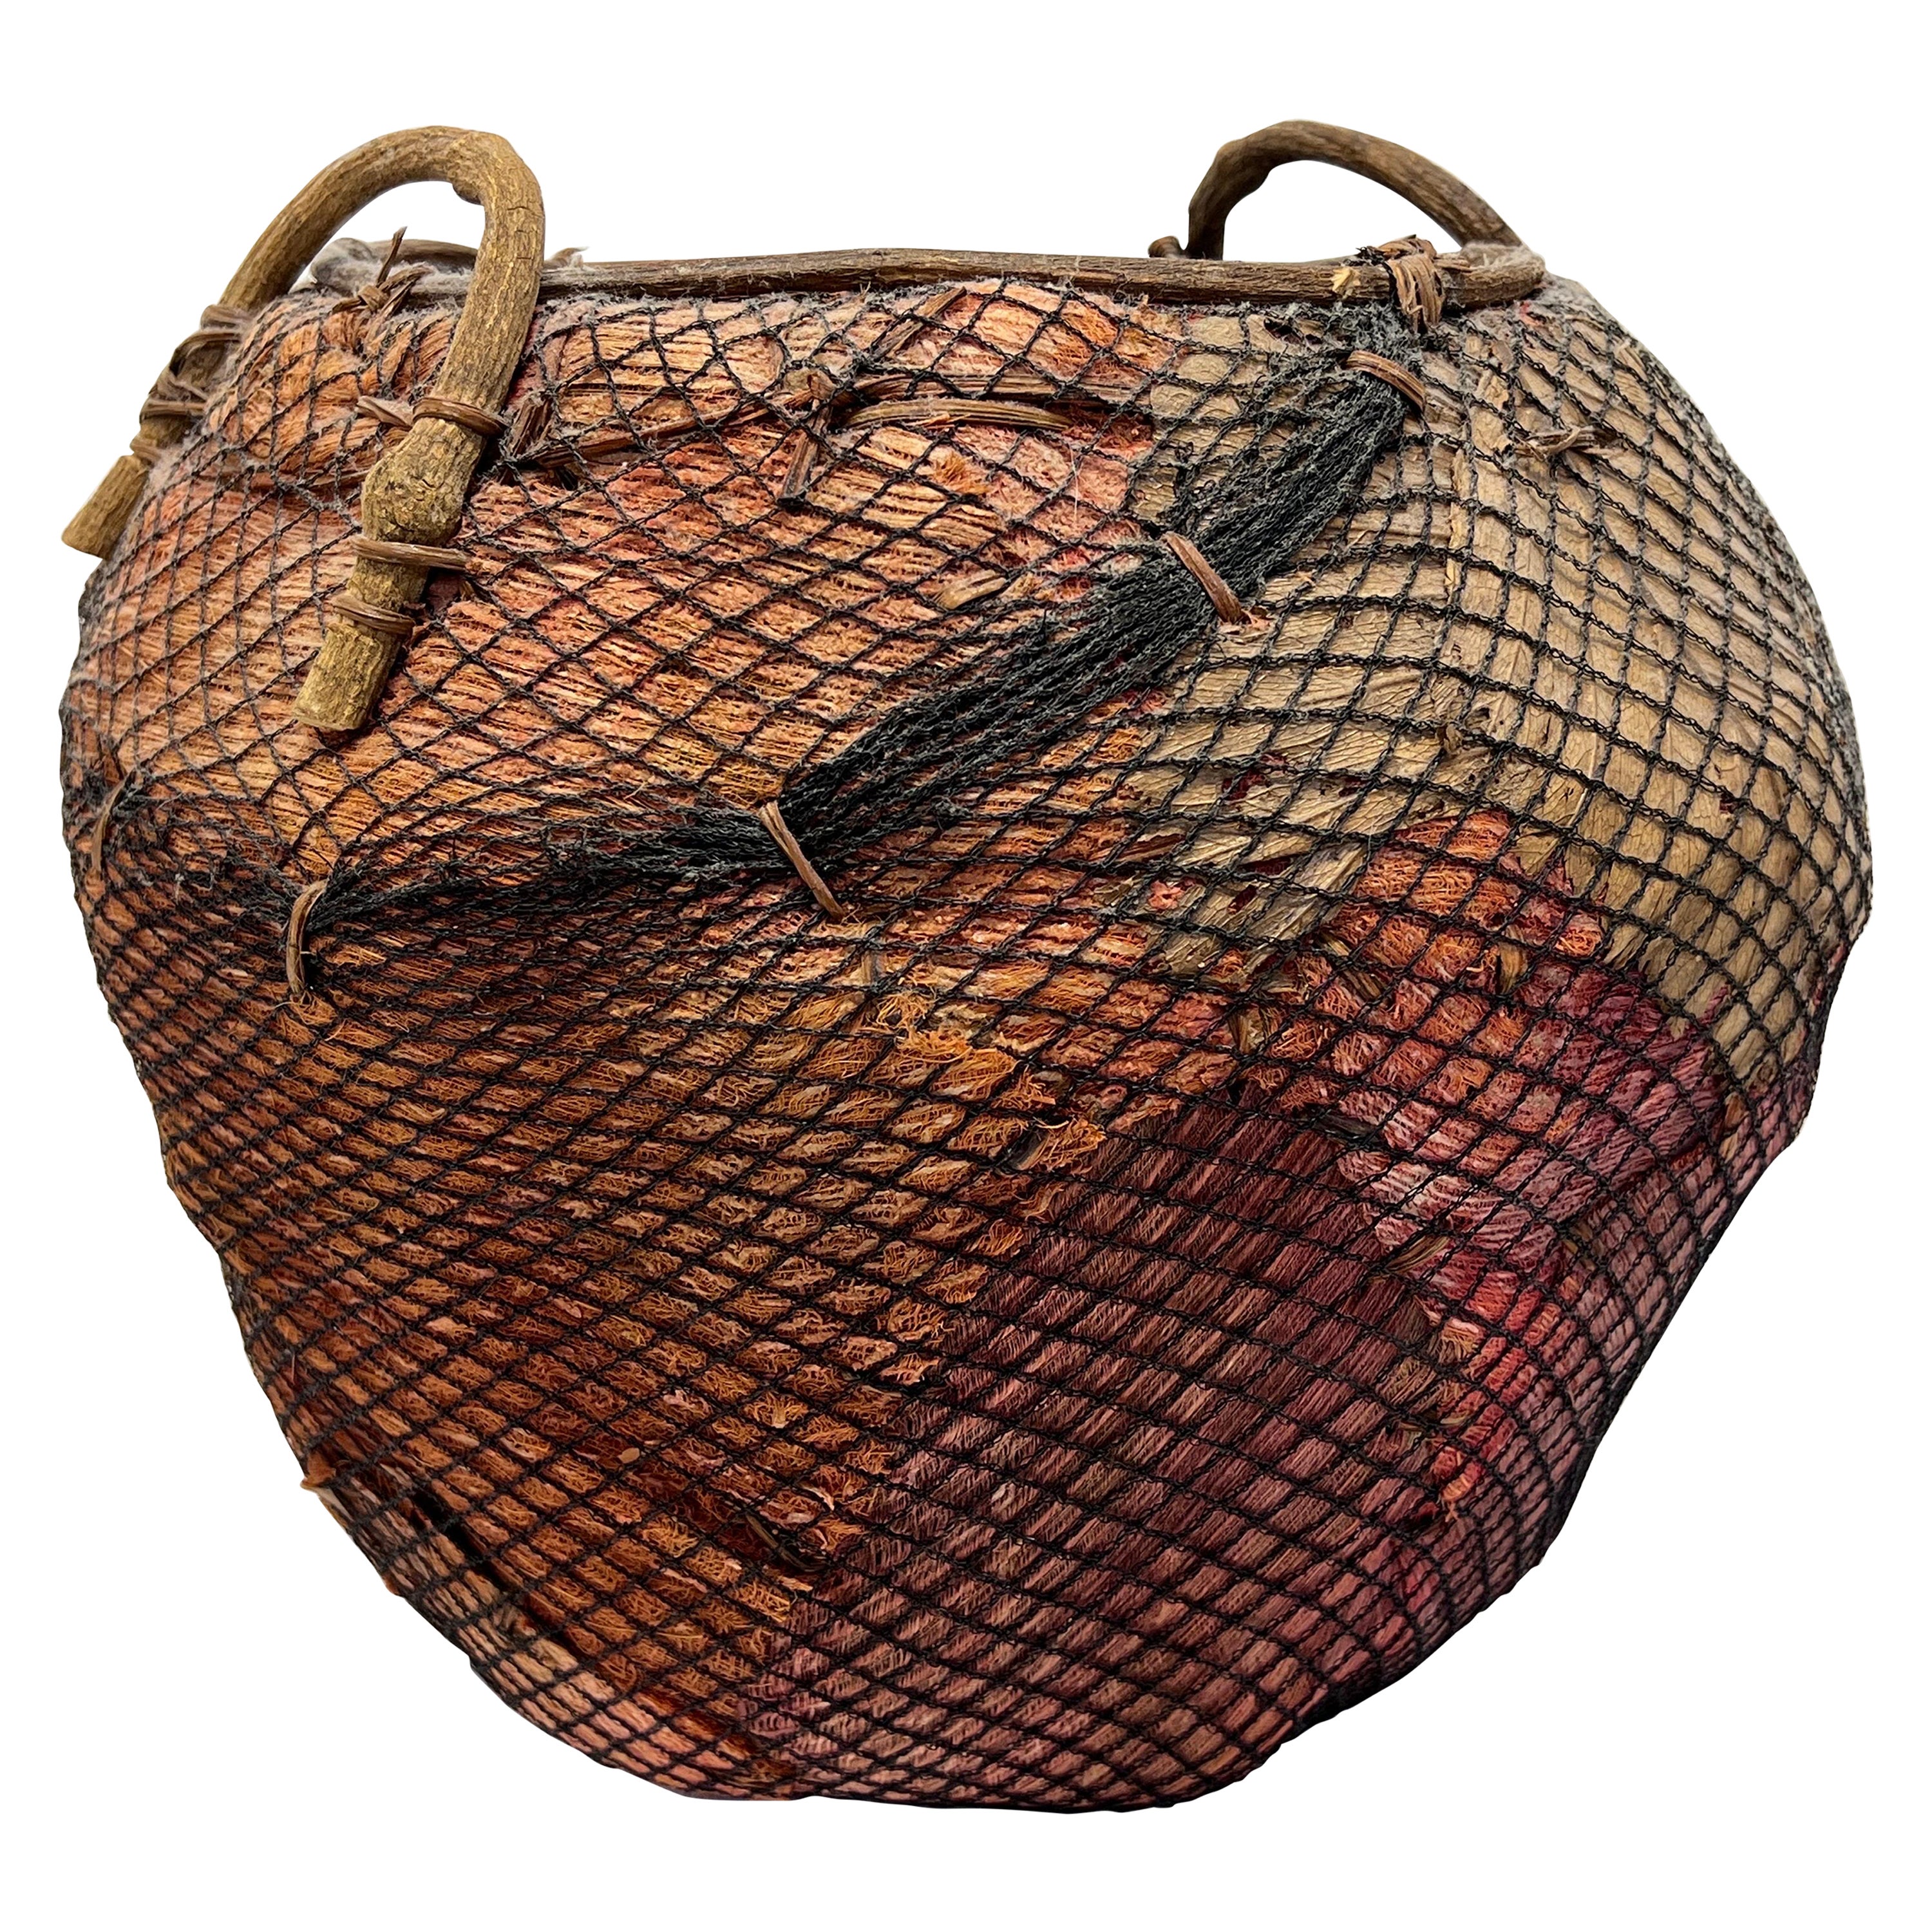 Handmade Natural Fiber and Leaf Basket Wrapped in Fish Net, 1970s For Sale